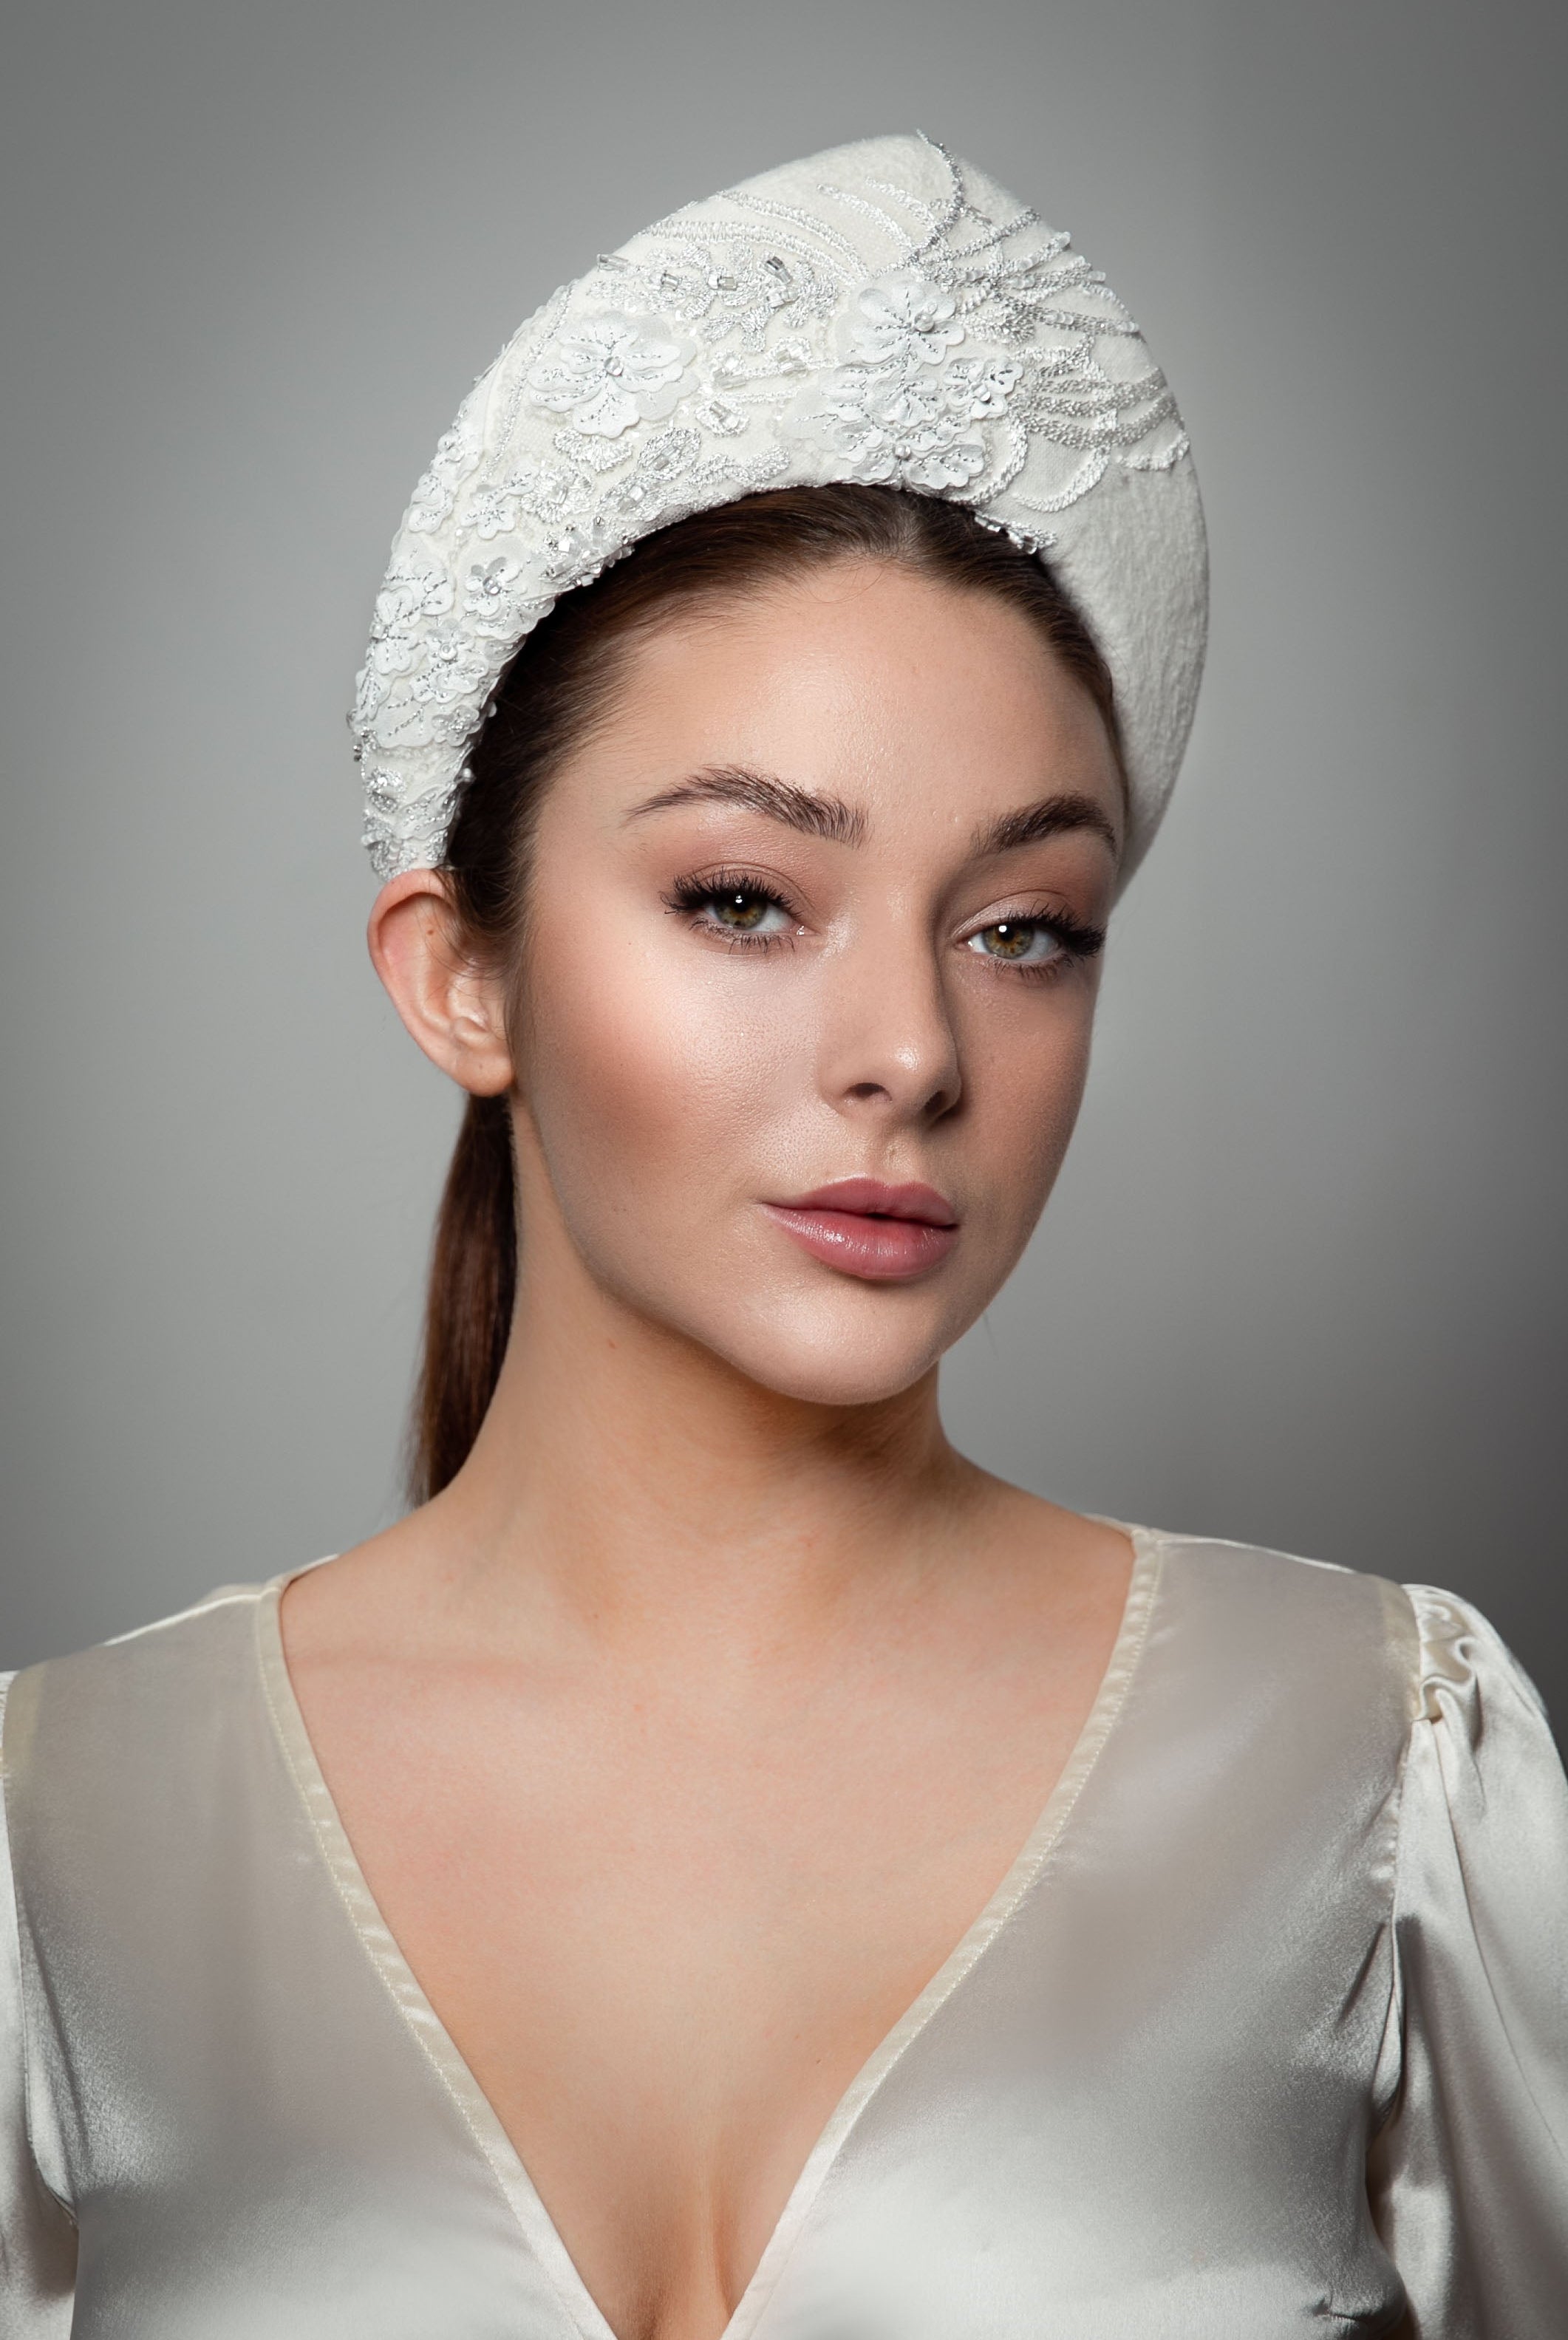 Bridal Headband with Lace Overlay - Evangeline - Maggie Mowbray Millinery